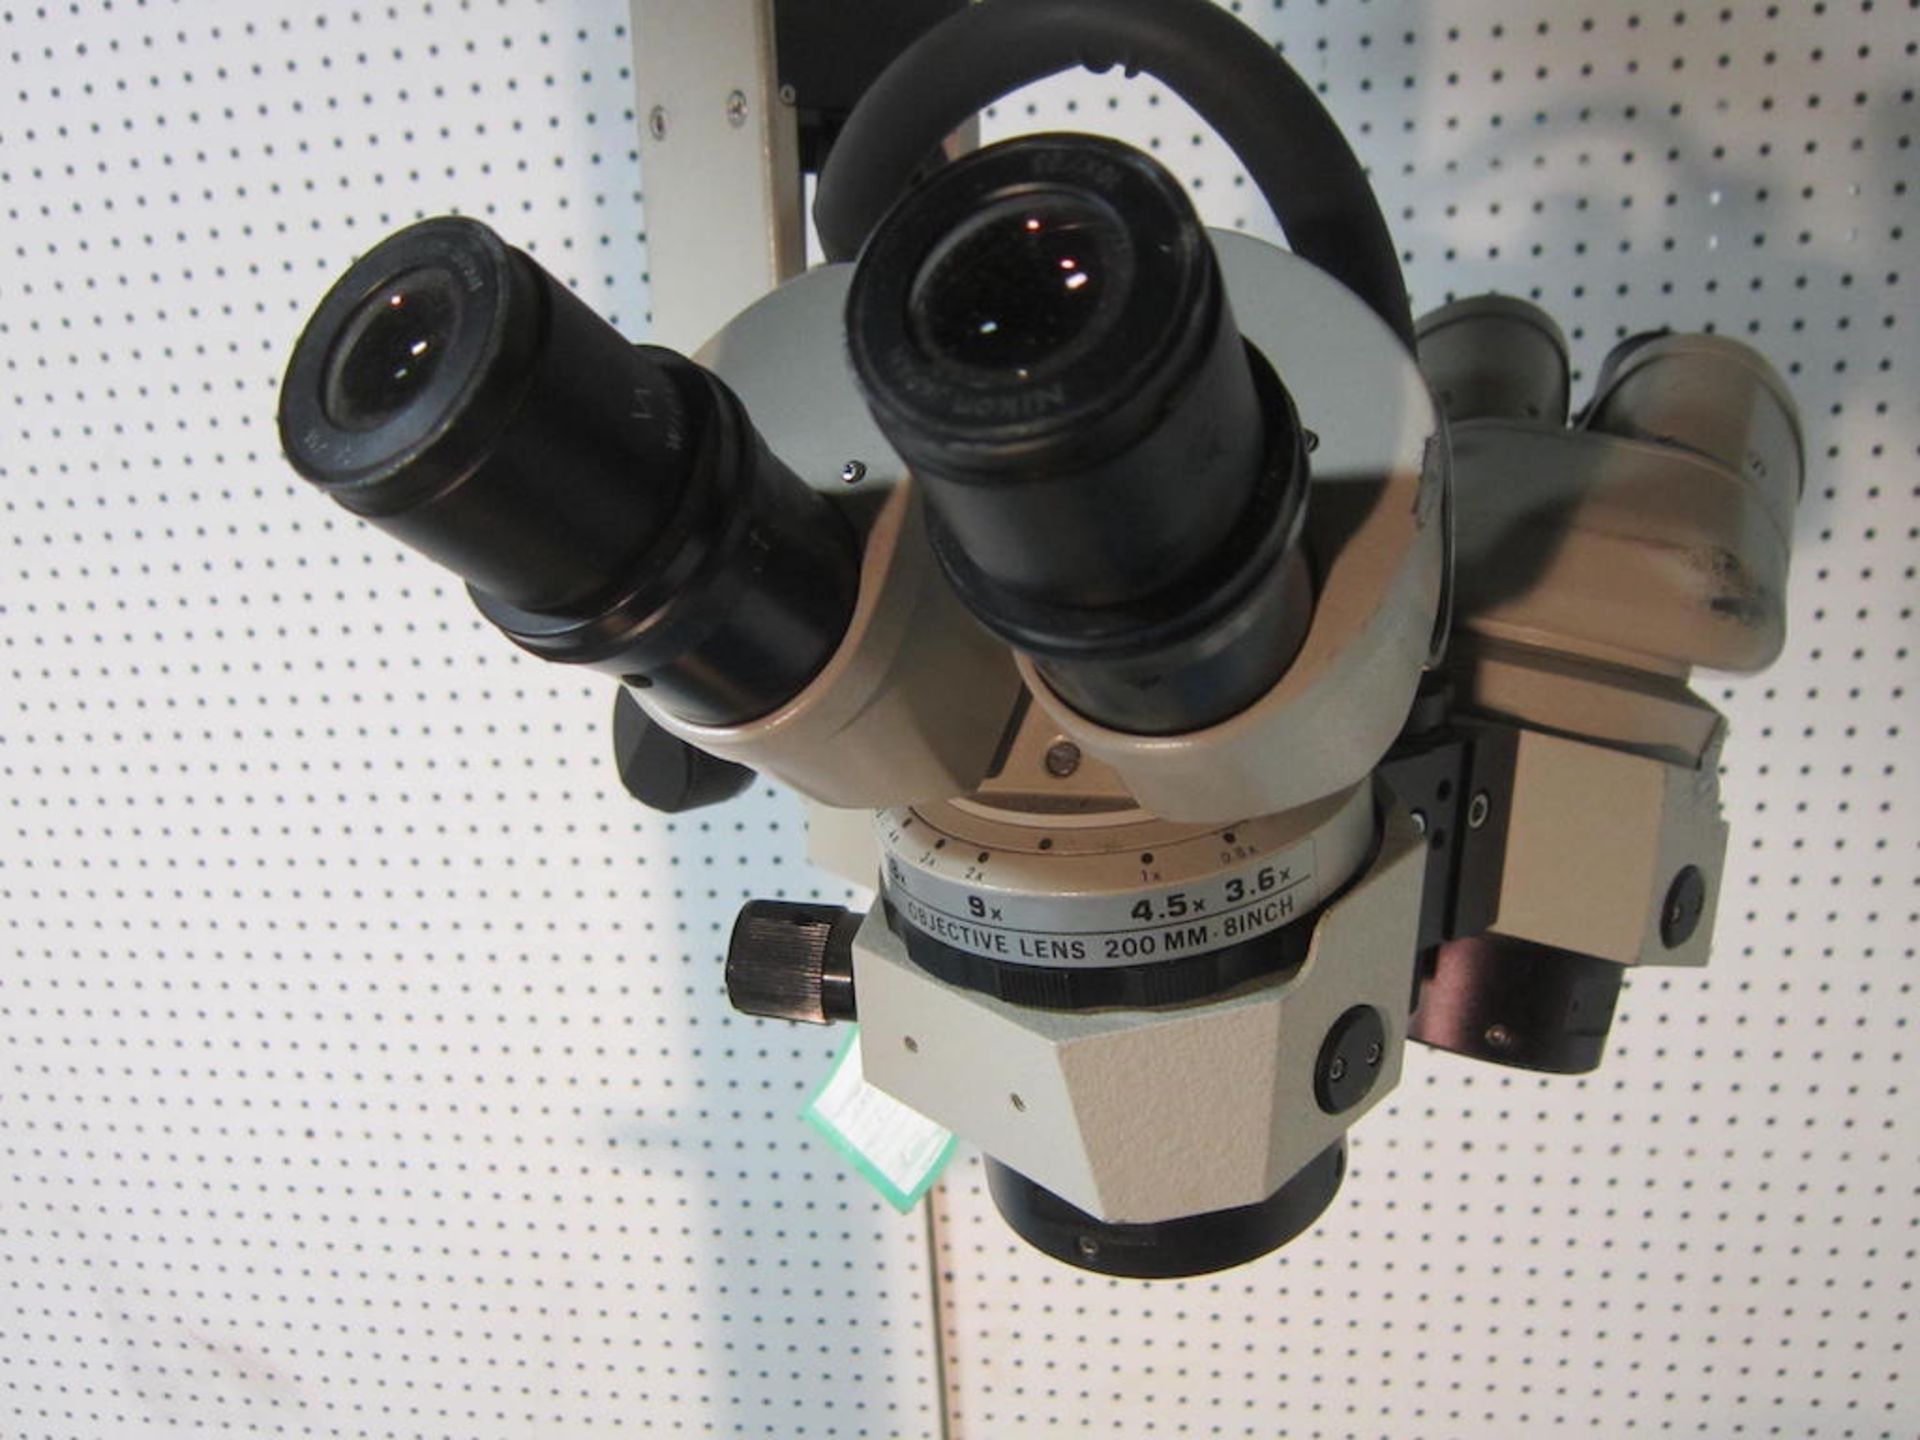 Weck Surgical Systems Microscope 1402 B12 with Light, Object Lens 200mm with Foot Switch - Image 10 of 32